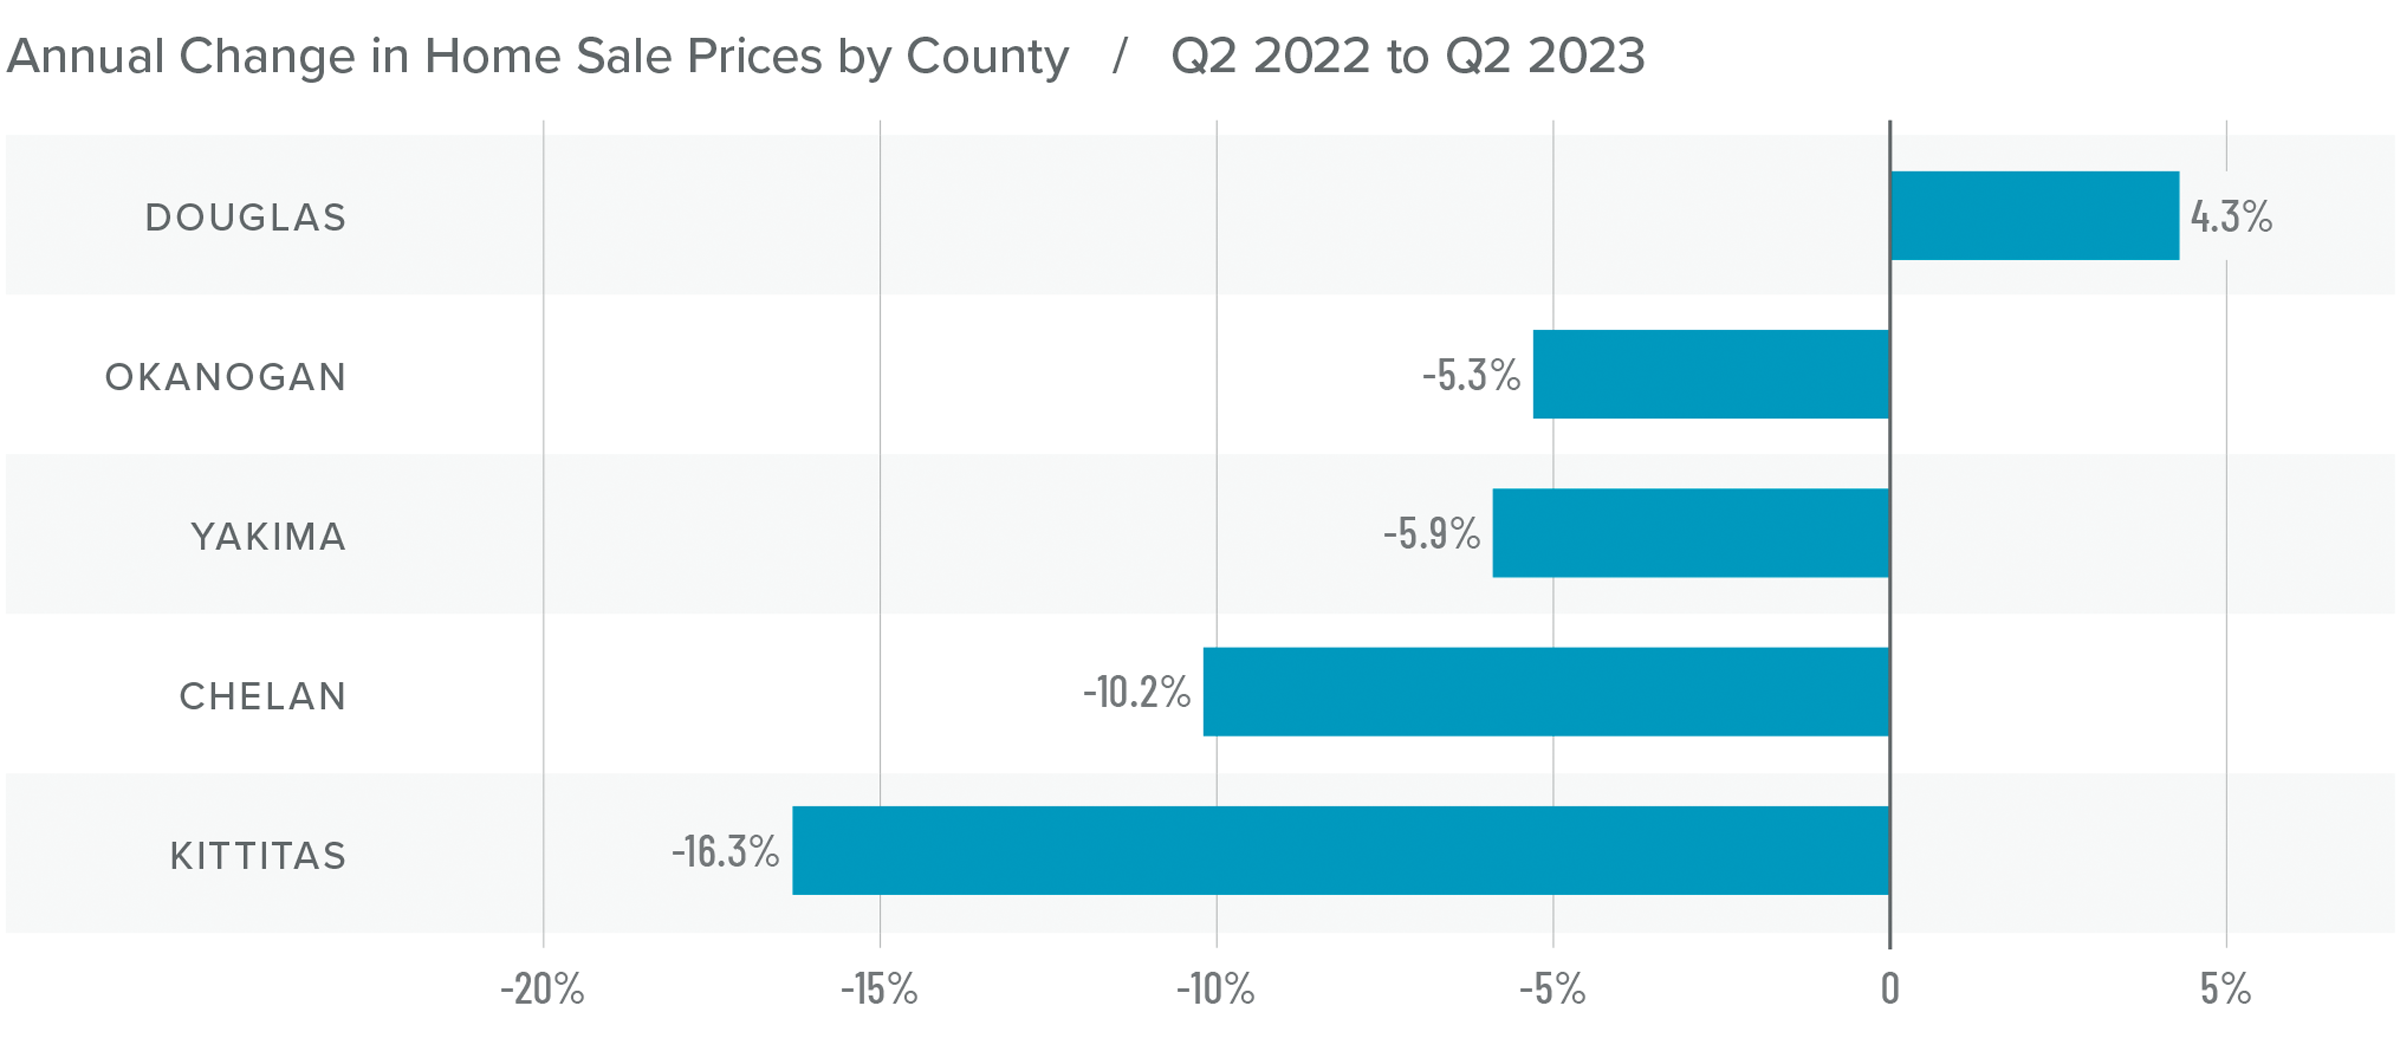 A bar graph showing the annual change in home sale prices by county in Central Washington from Q2 2022 to Q2 2023. Douglas County tops the list at 4.3%, while Kittitas County had the greatest decline at -16.3%. Okanogan and Yakima Counties are toward the middle at around -5%.